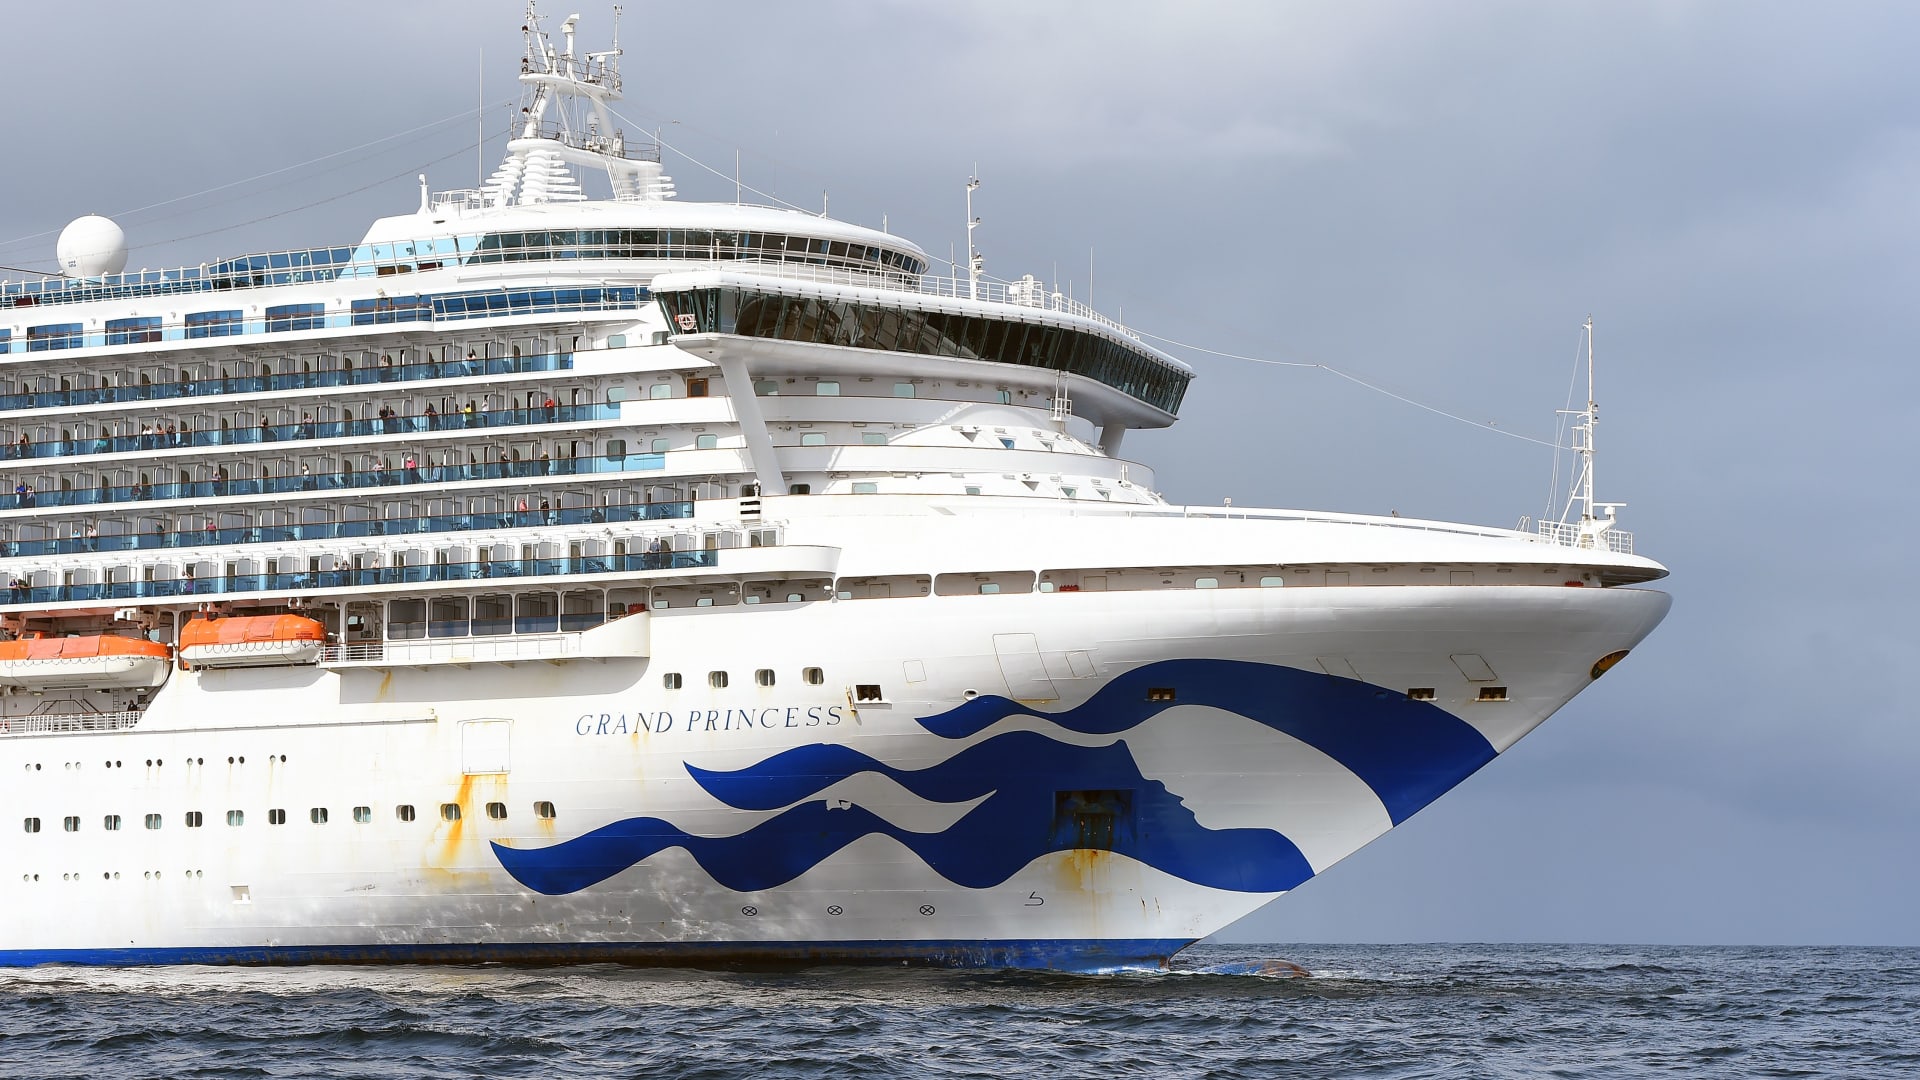 Carnival’s Princess Cruises will return to Japan in March 2023 after almost three-year hiatus